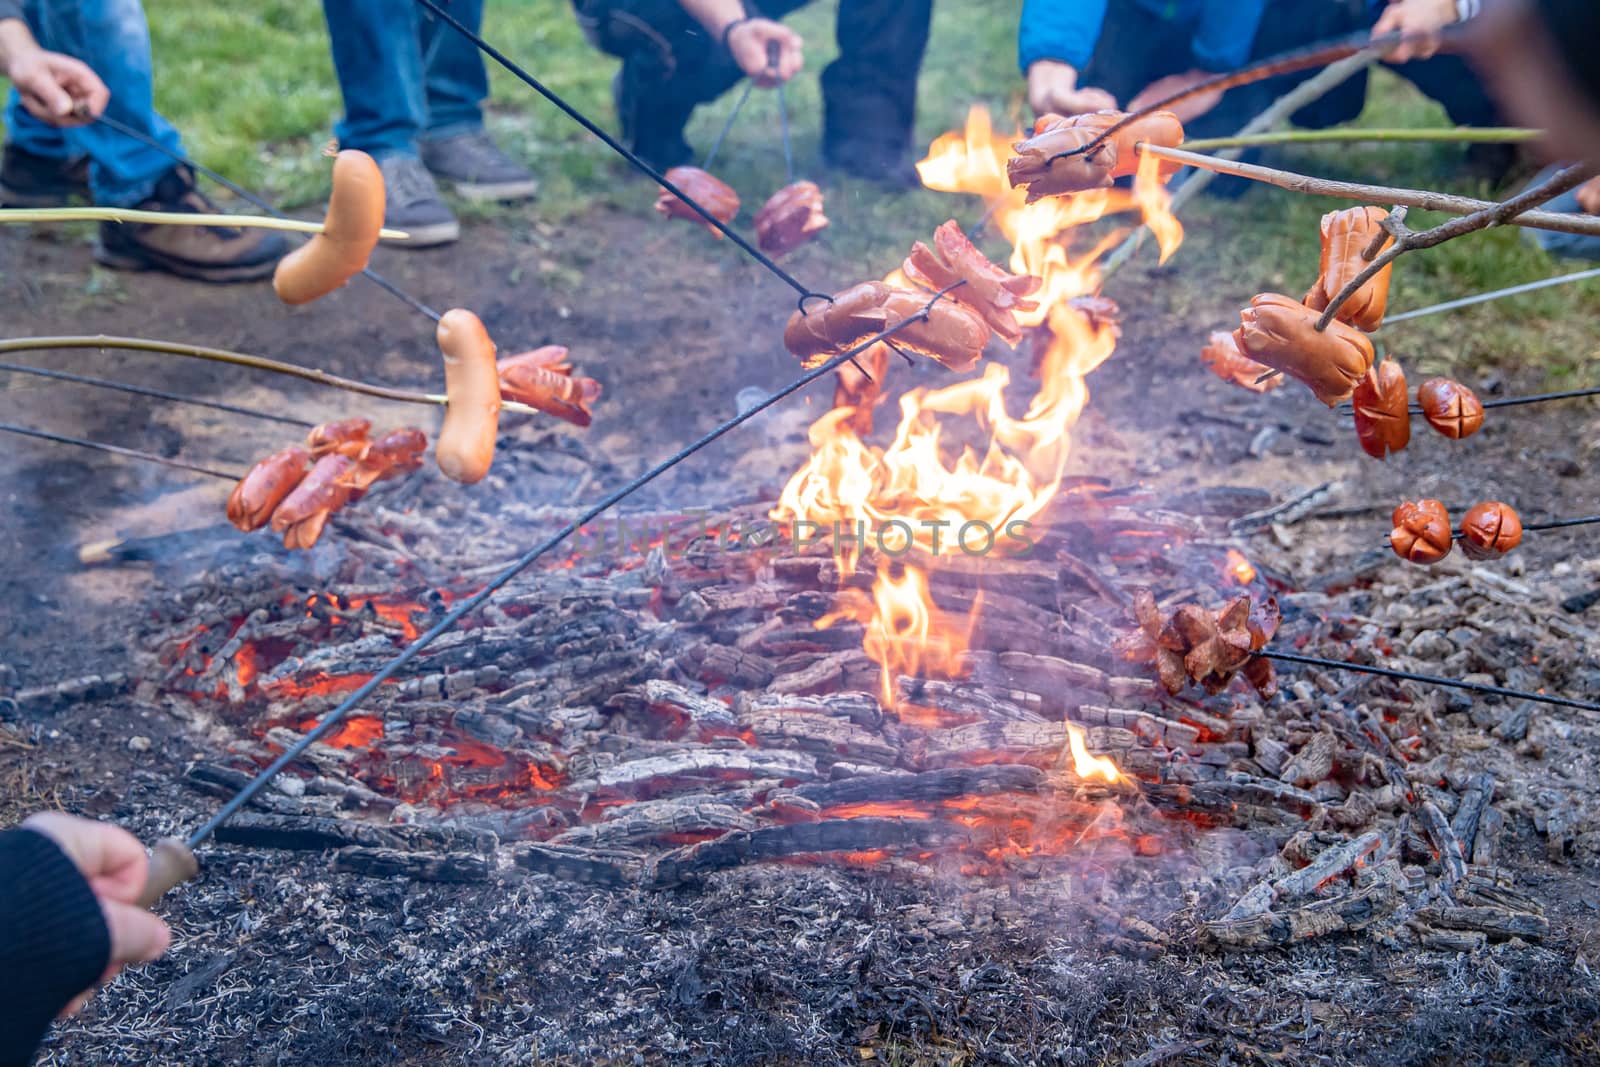 grilling sausages on an open fire with large family gatherings.